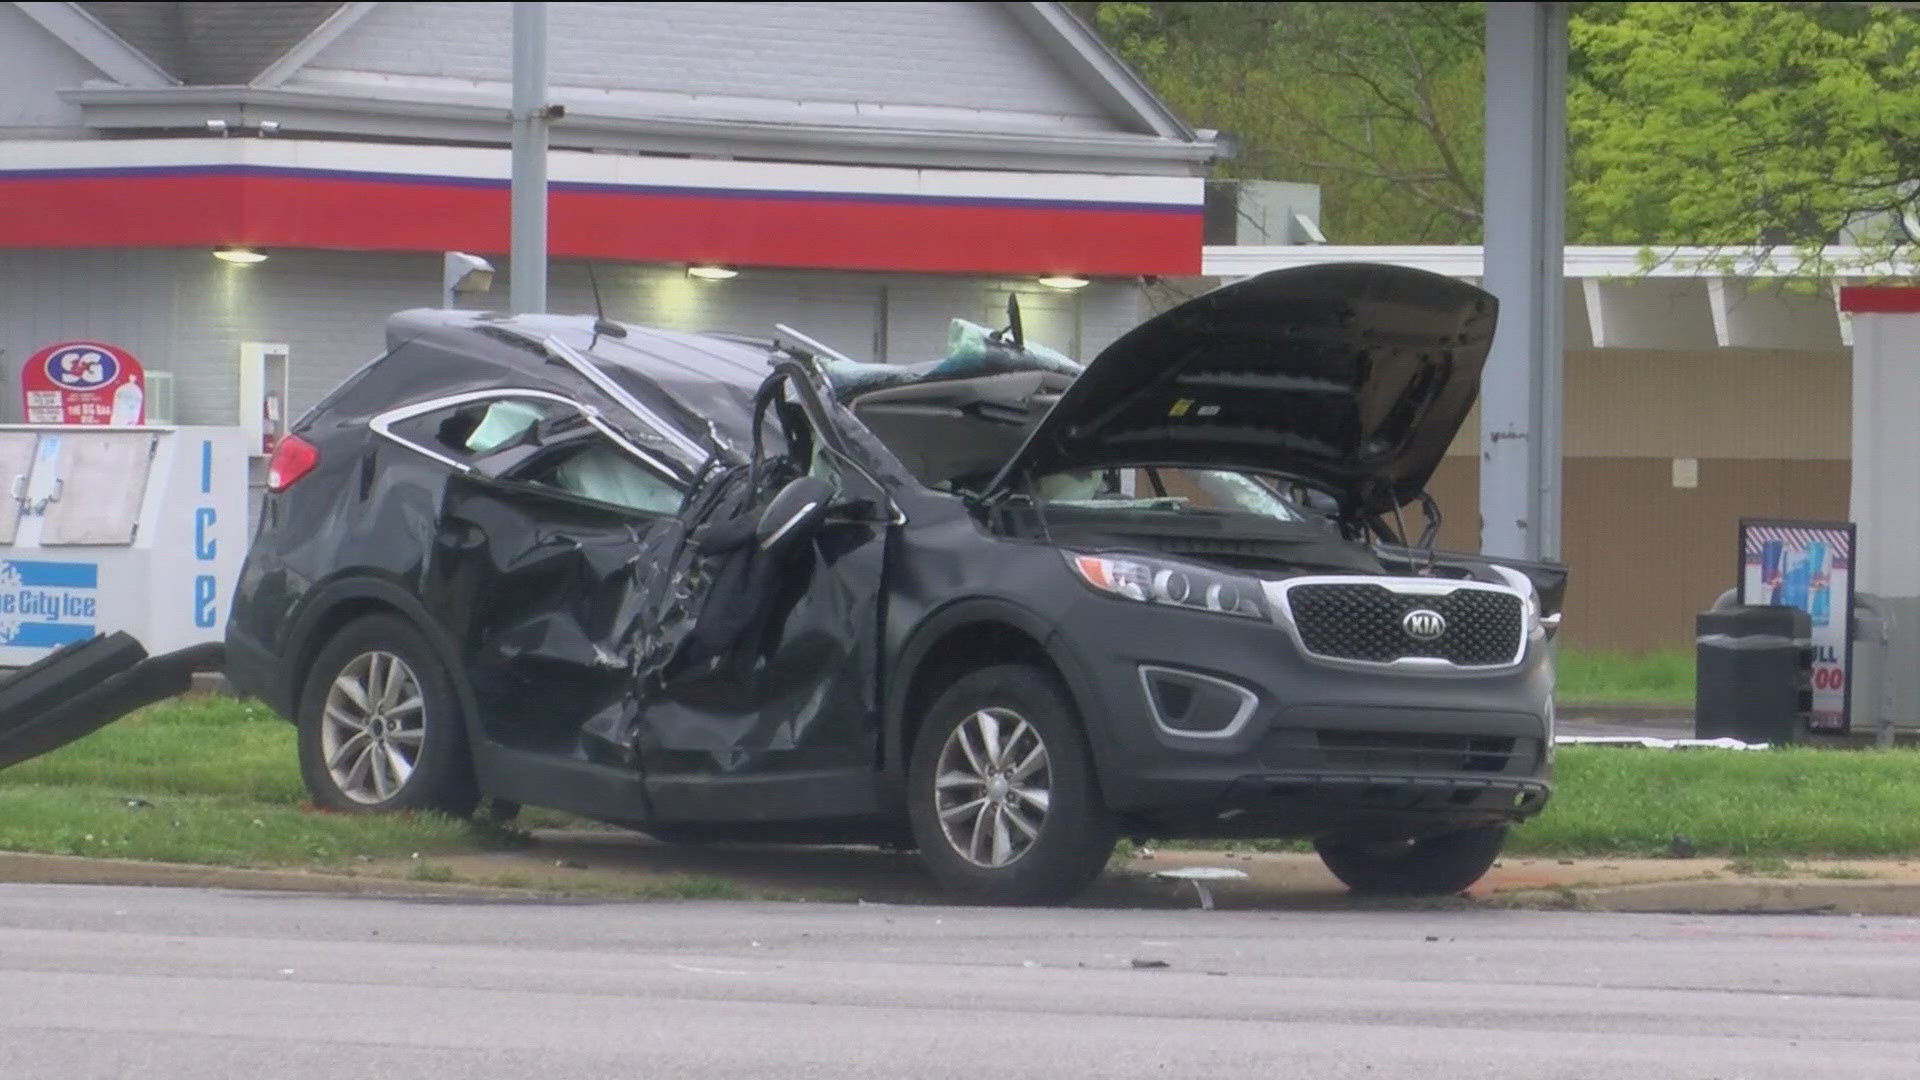 The 31-year-old from Toledo had to be extricated from their vehicle after the crash on Byrne Road and Hill Avenue.